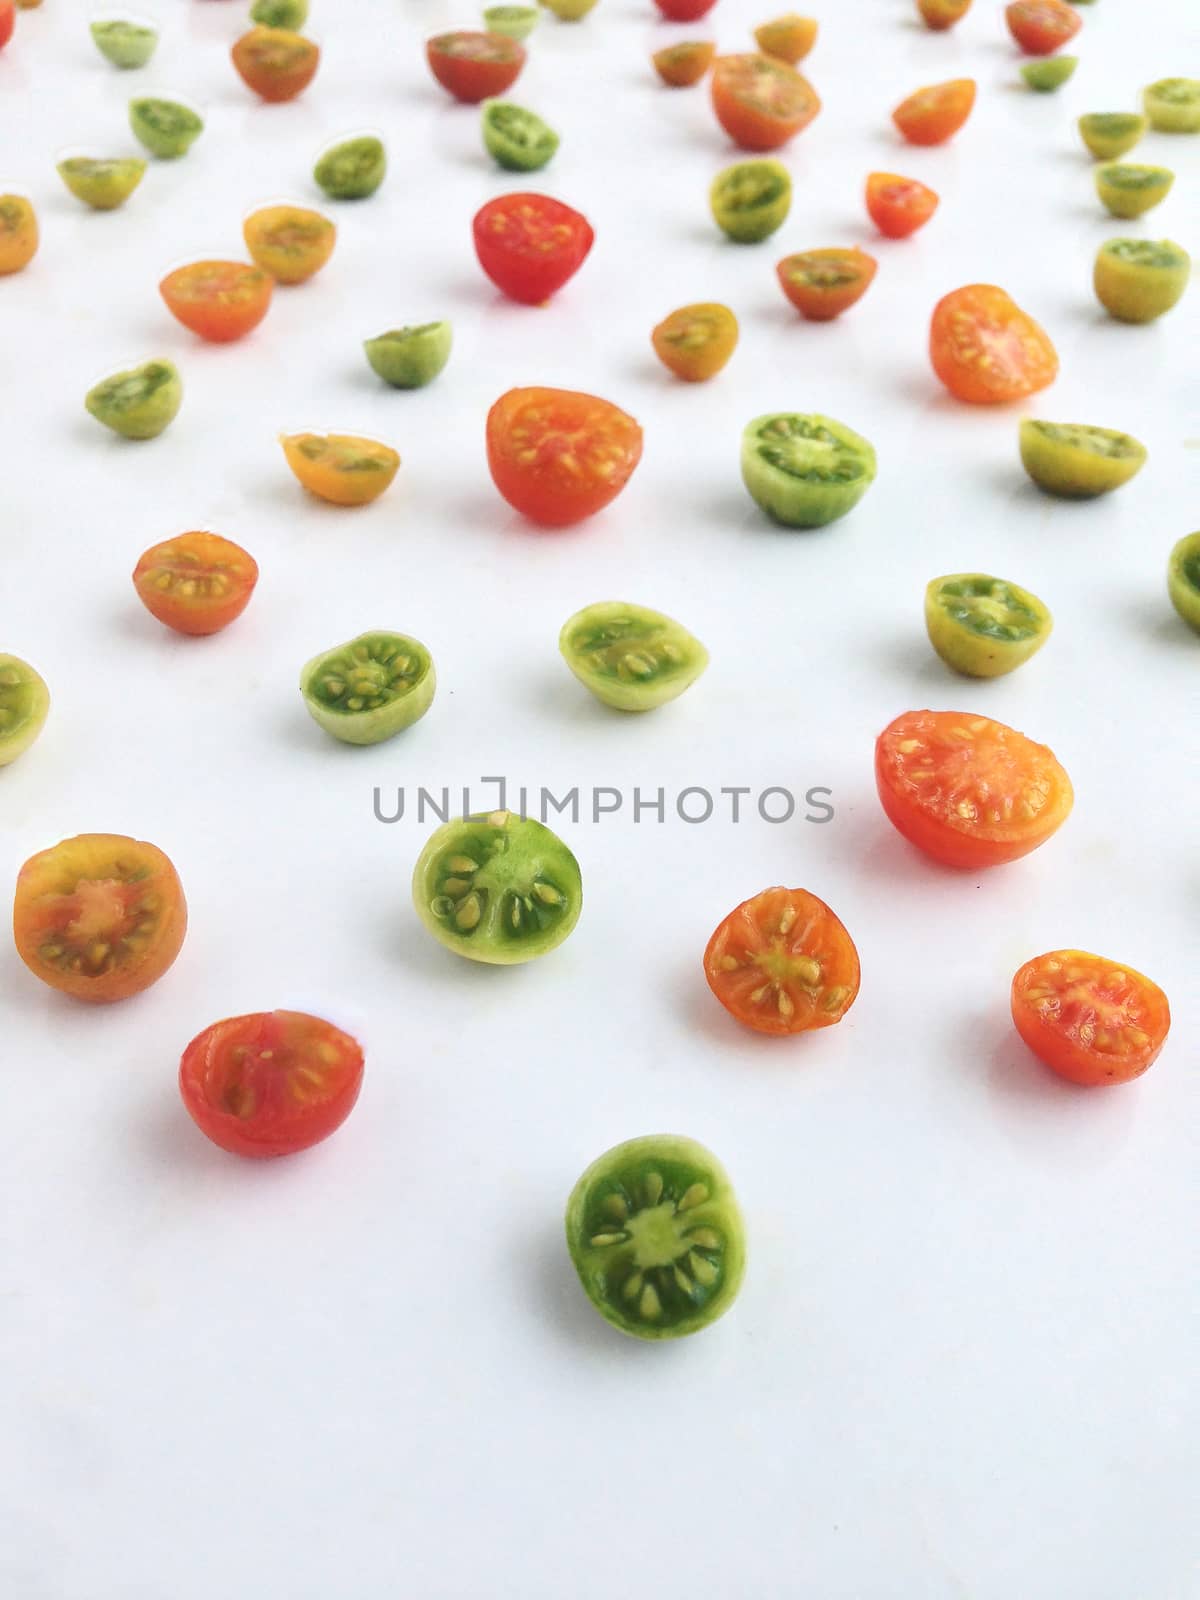 Colorful slices tomatoes